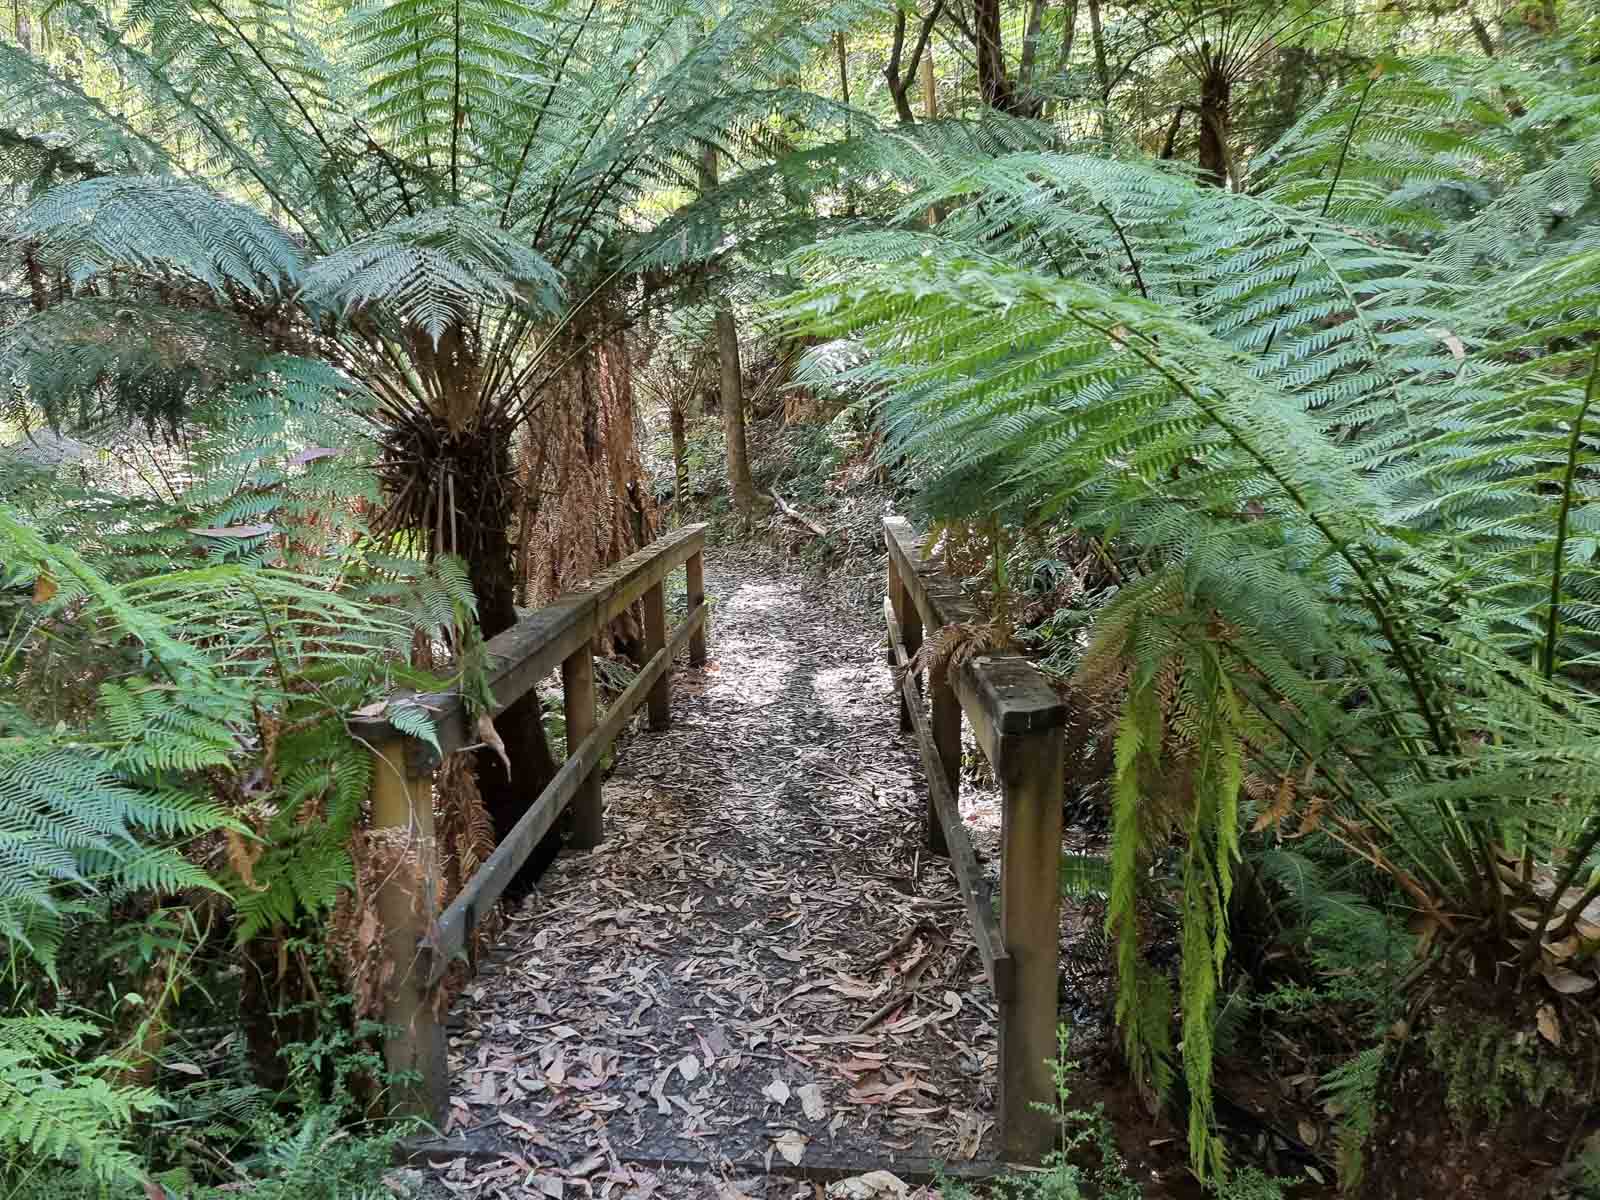 A leaf covered boardwalk surrounded by ferns at fern gully